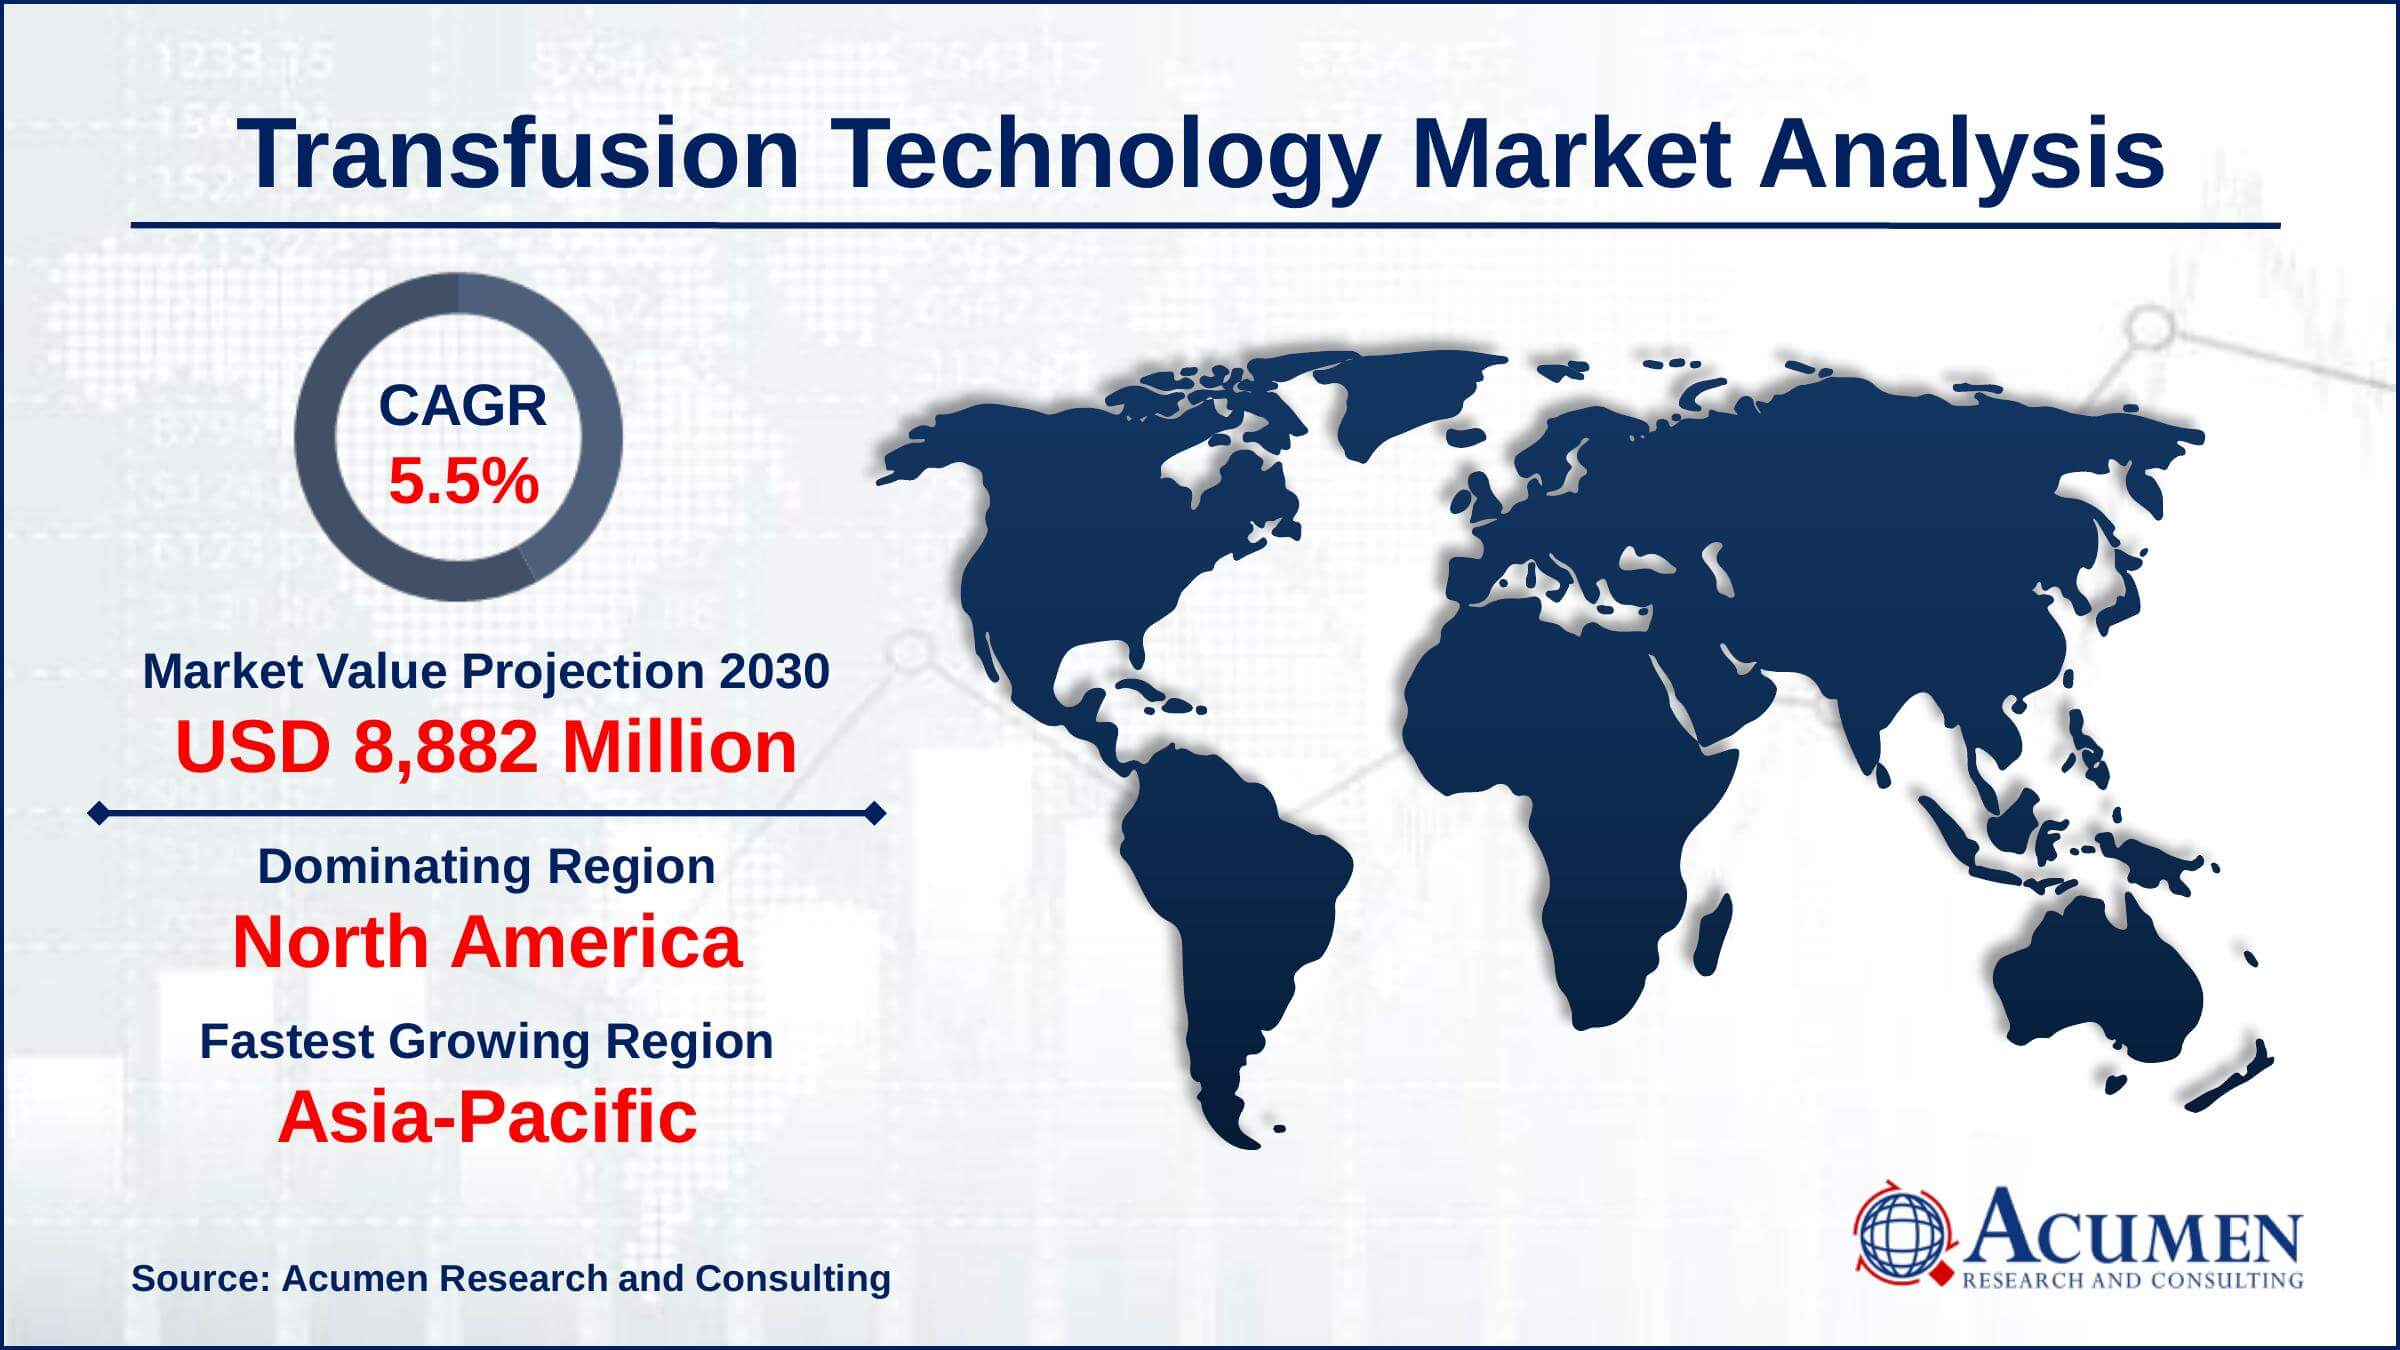 North America transfusion technology market share accounted for over 33% of total market shares in 2021